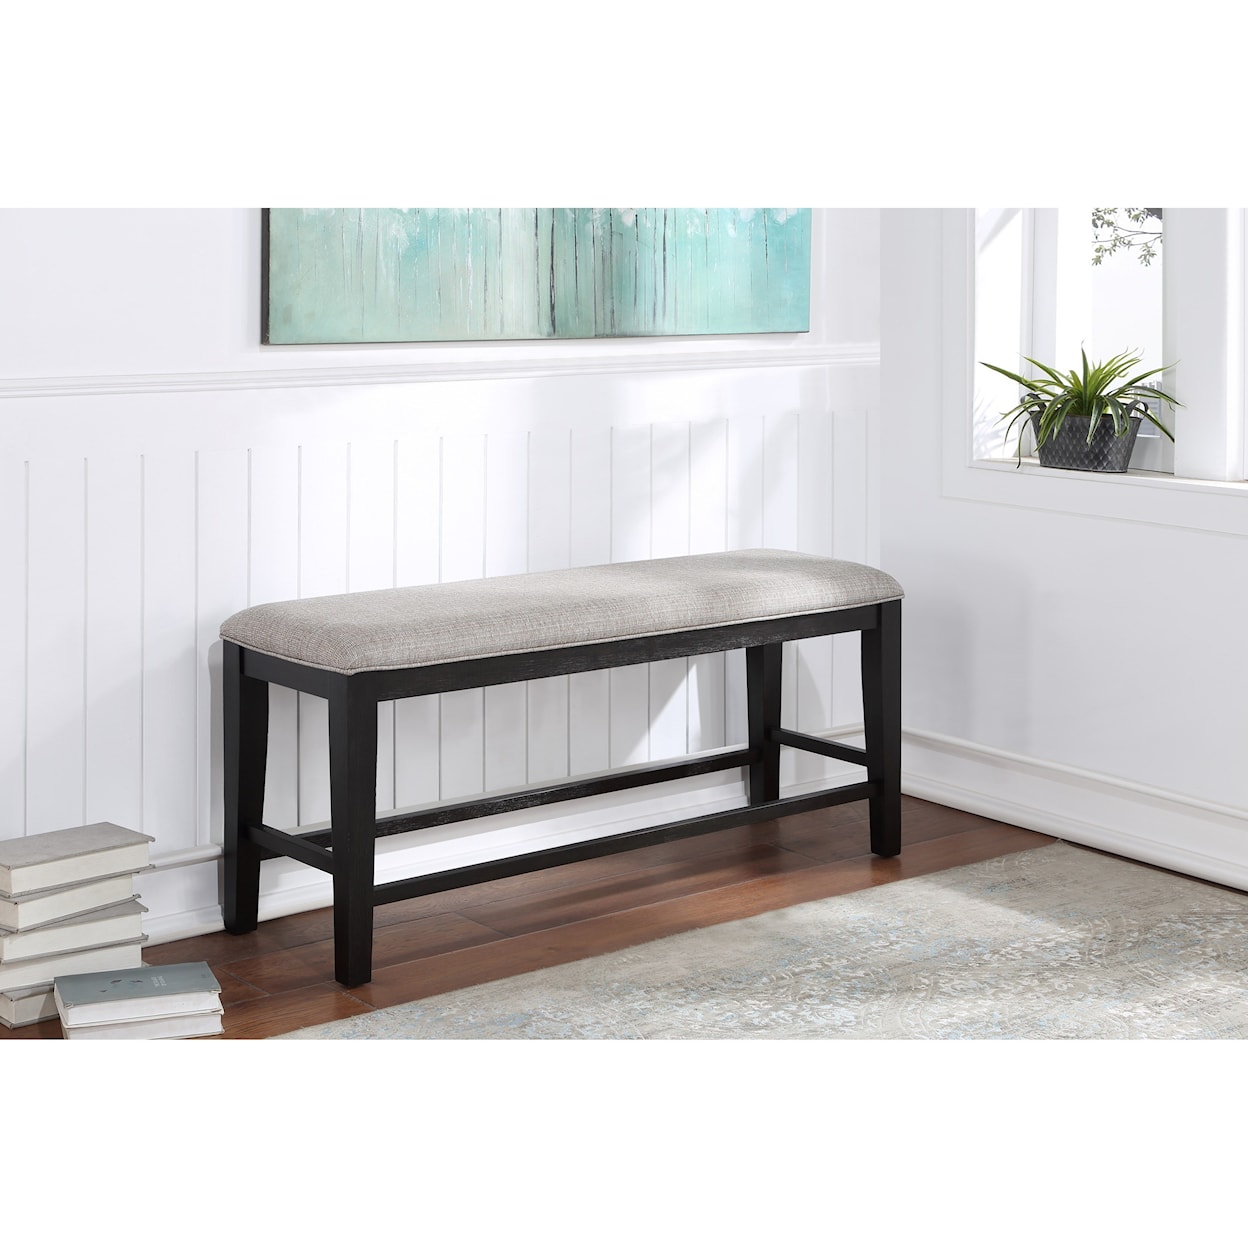 Steve Silver Halle Counter Height Dining Bench